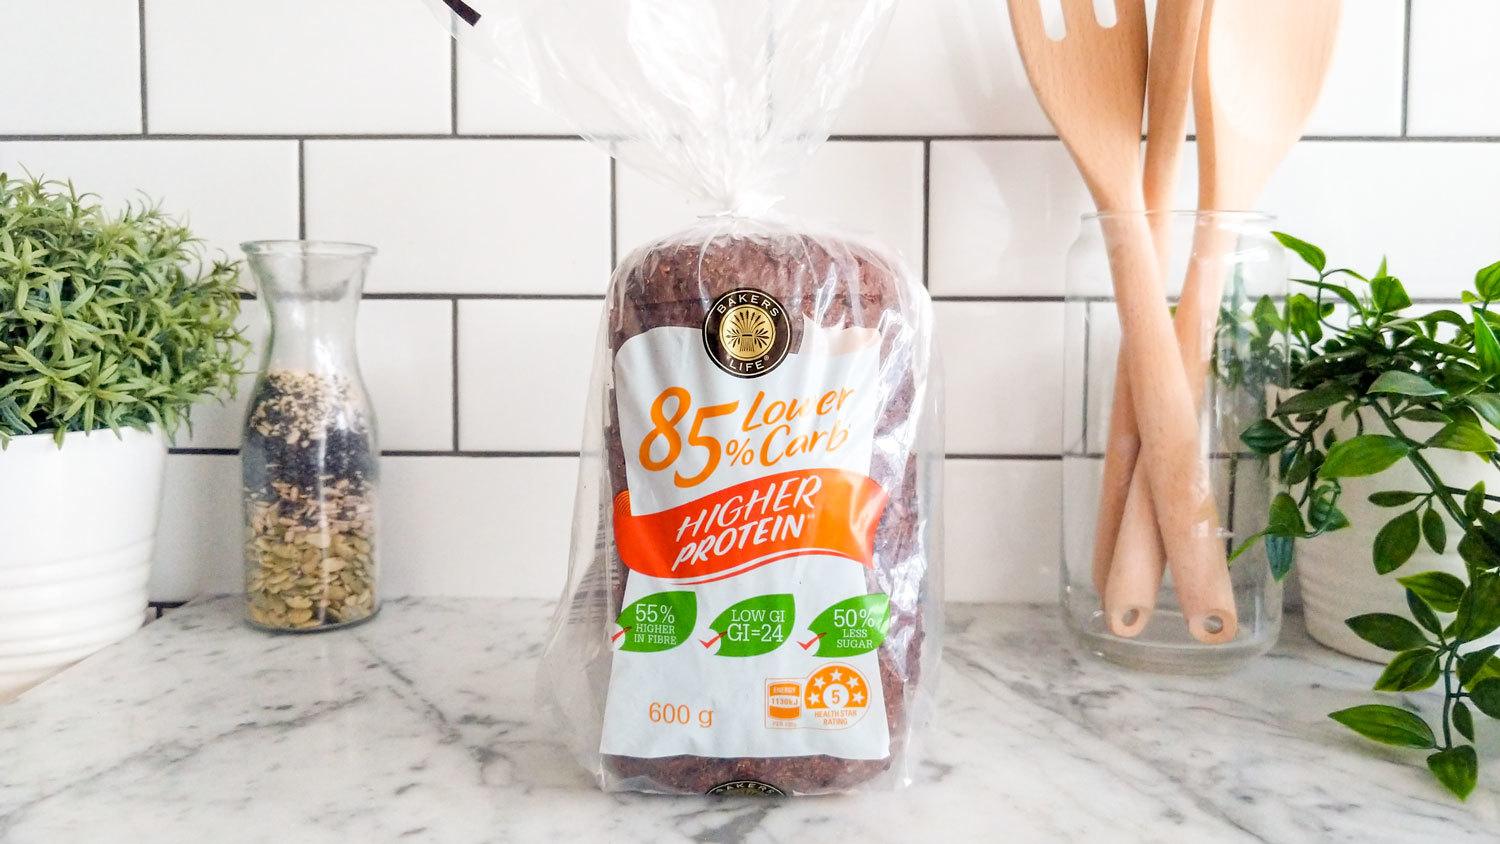 Aldi Low Carb Bread - by Bakers Life // Product Review - PBCo.